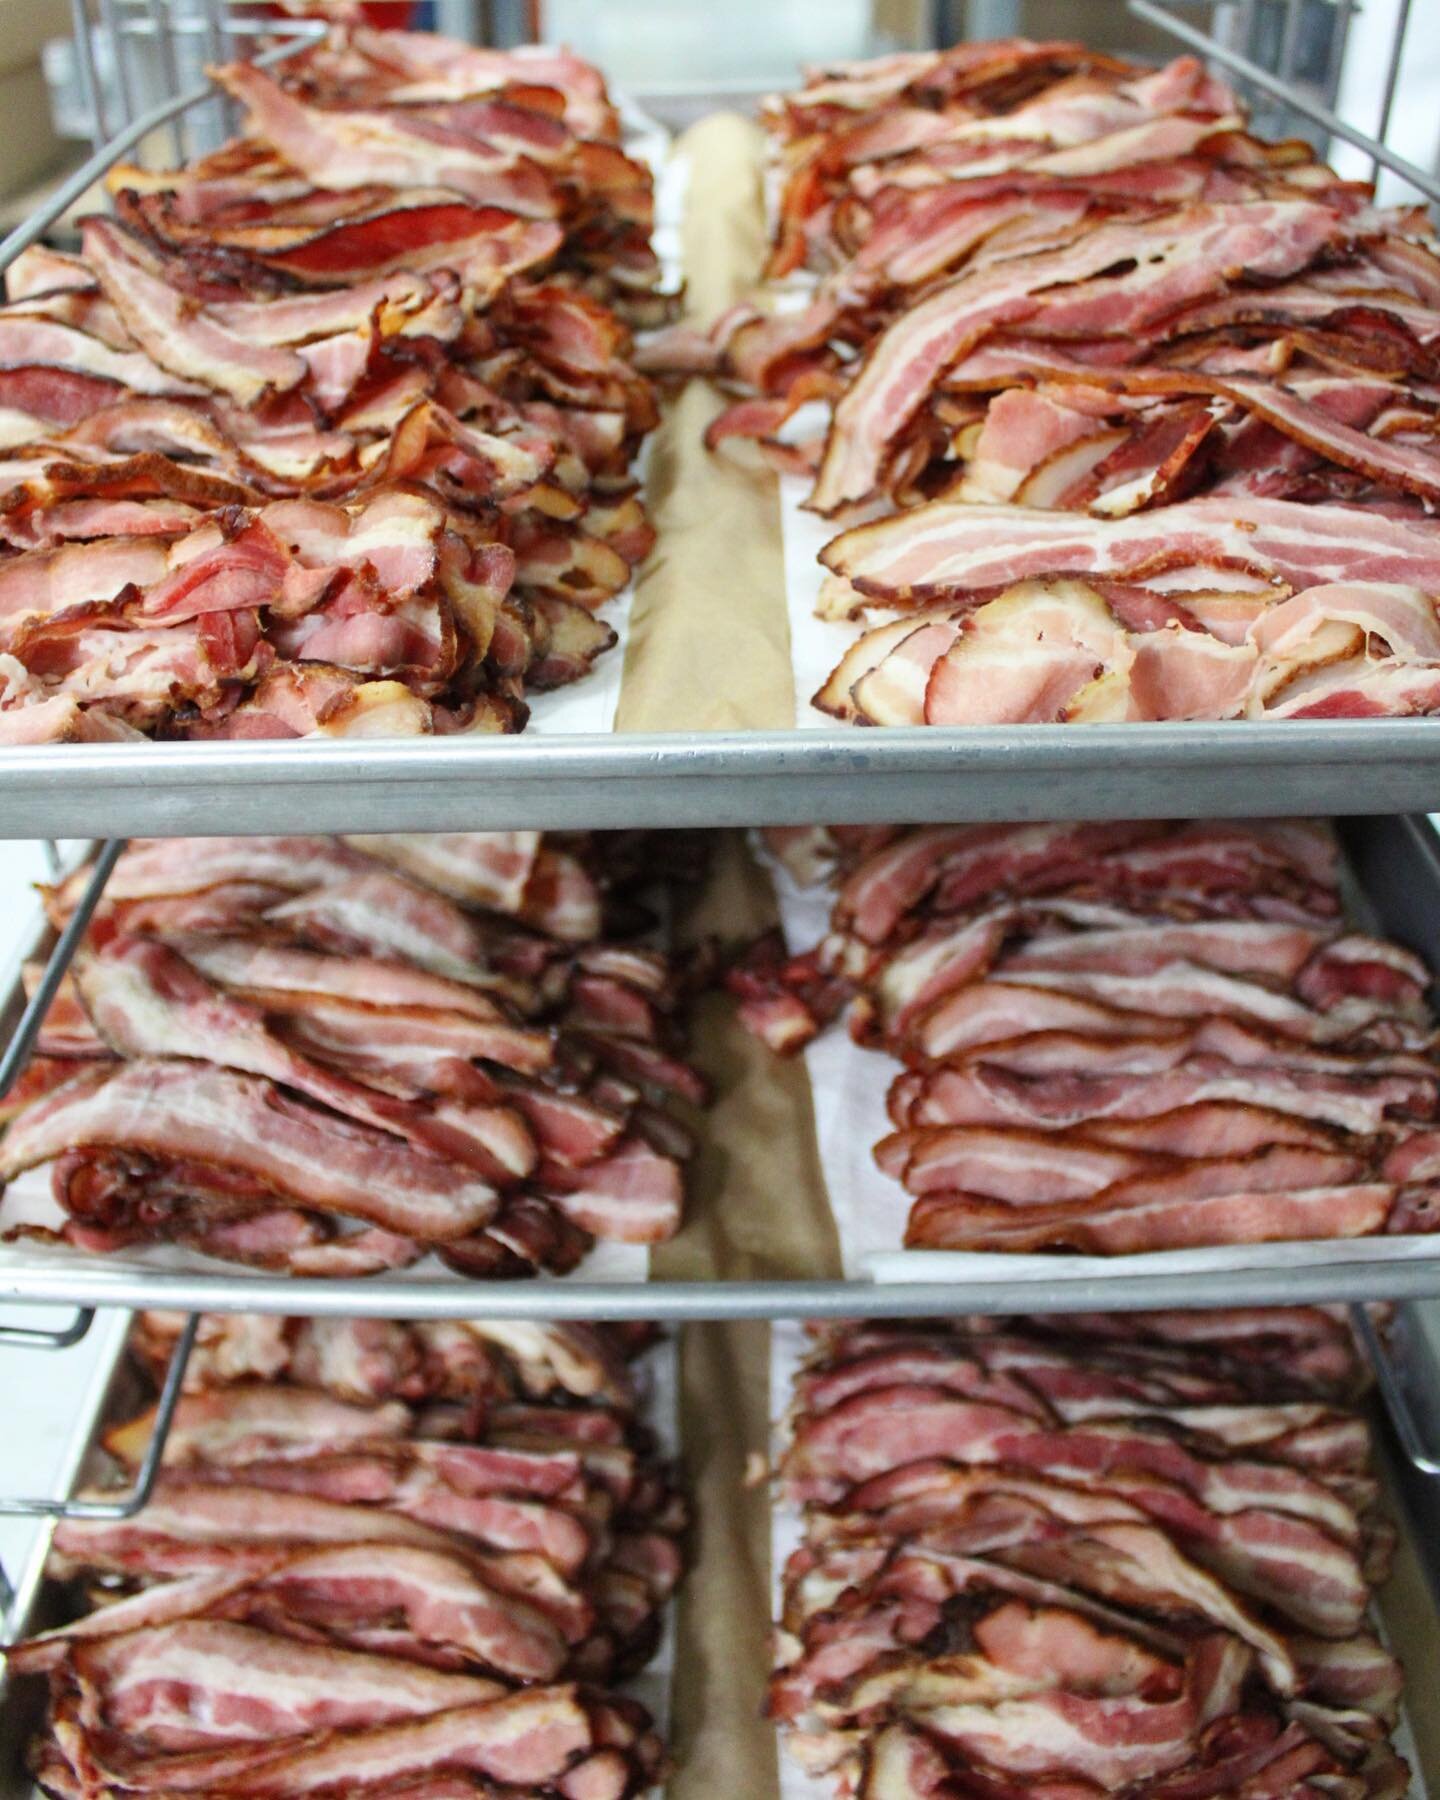 Stackin&rsquo; and rackin&rsquo; bacon this morning 🥓🥓🥓

Wanting to add proteins to your product but need certification to process it? 🙋🏻✅ As an USDA inspected facility, we are here to help with meat prep and cooking for you!